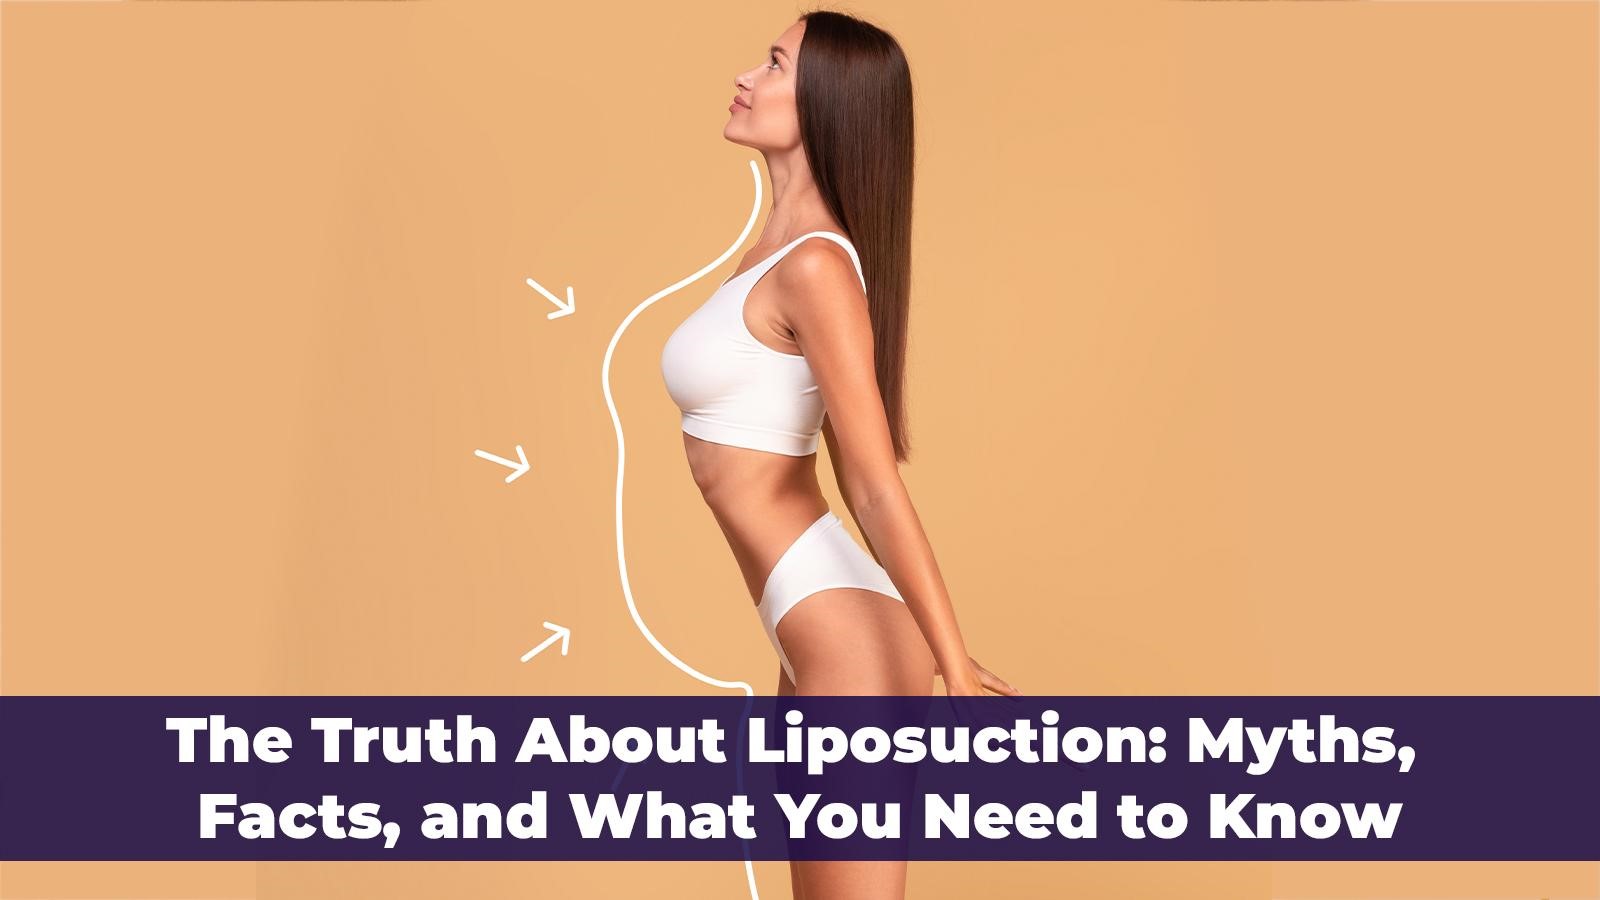 The Truth About Liposuction: Myths, Facts, and What You Need to Know